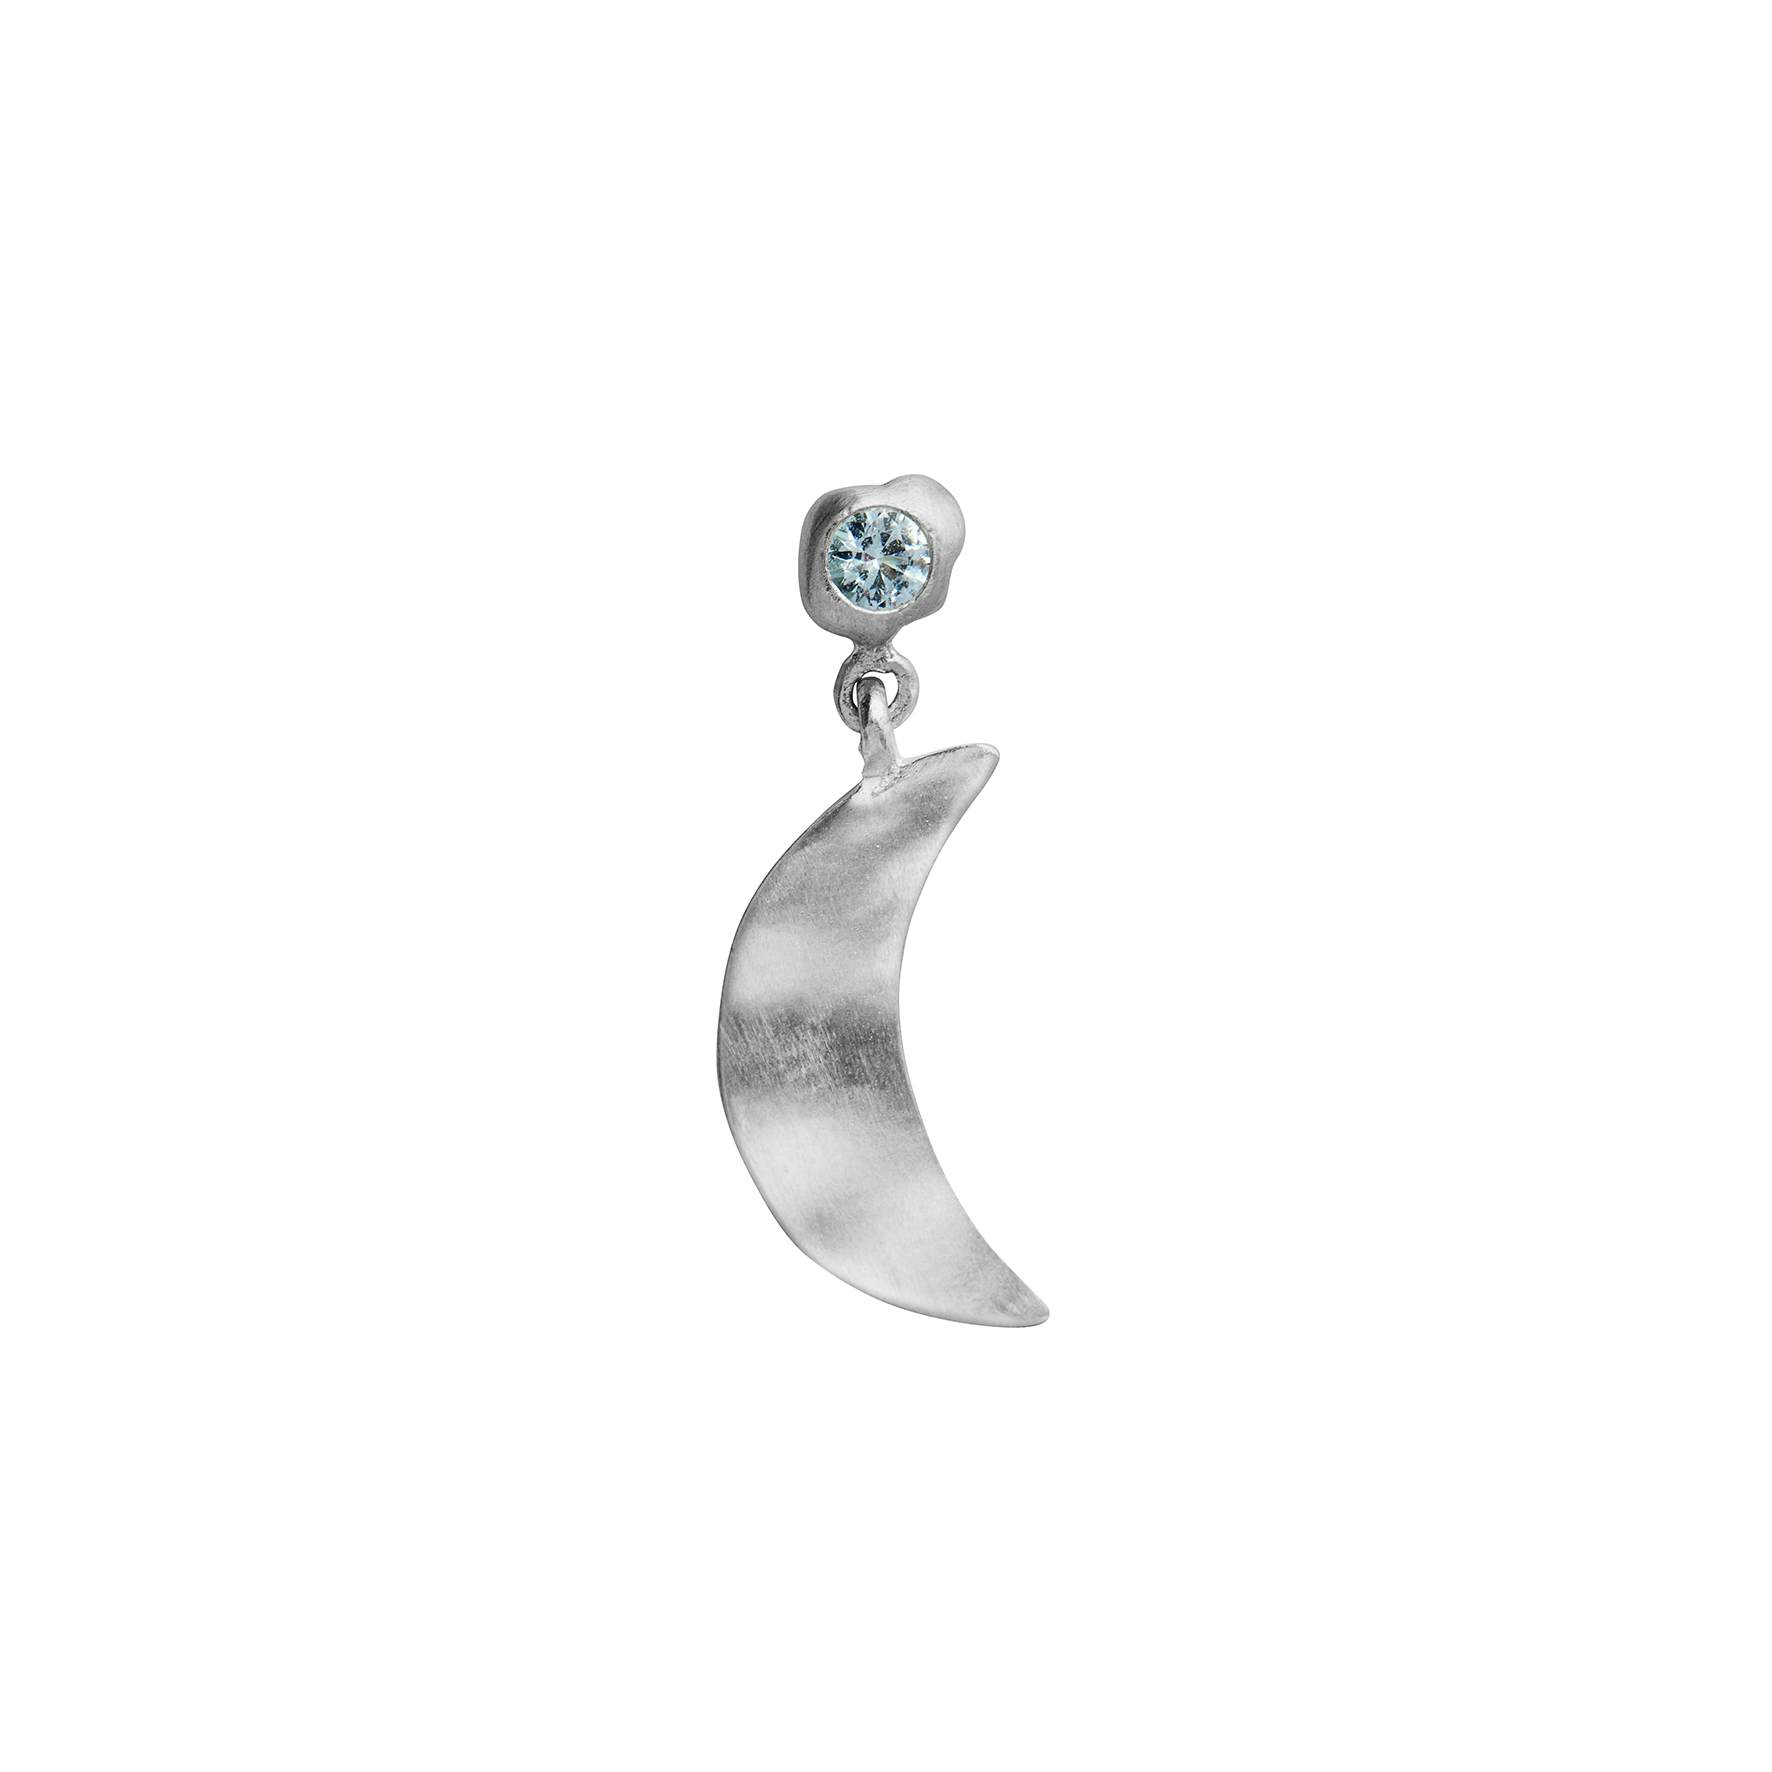 Big Dot Bella Moon with Blue Lagune Stone from STINE A Jewelry in Silver Sterling 925